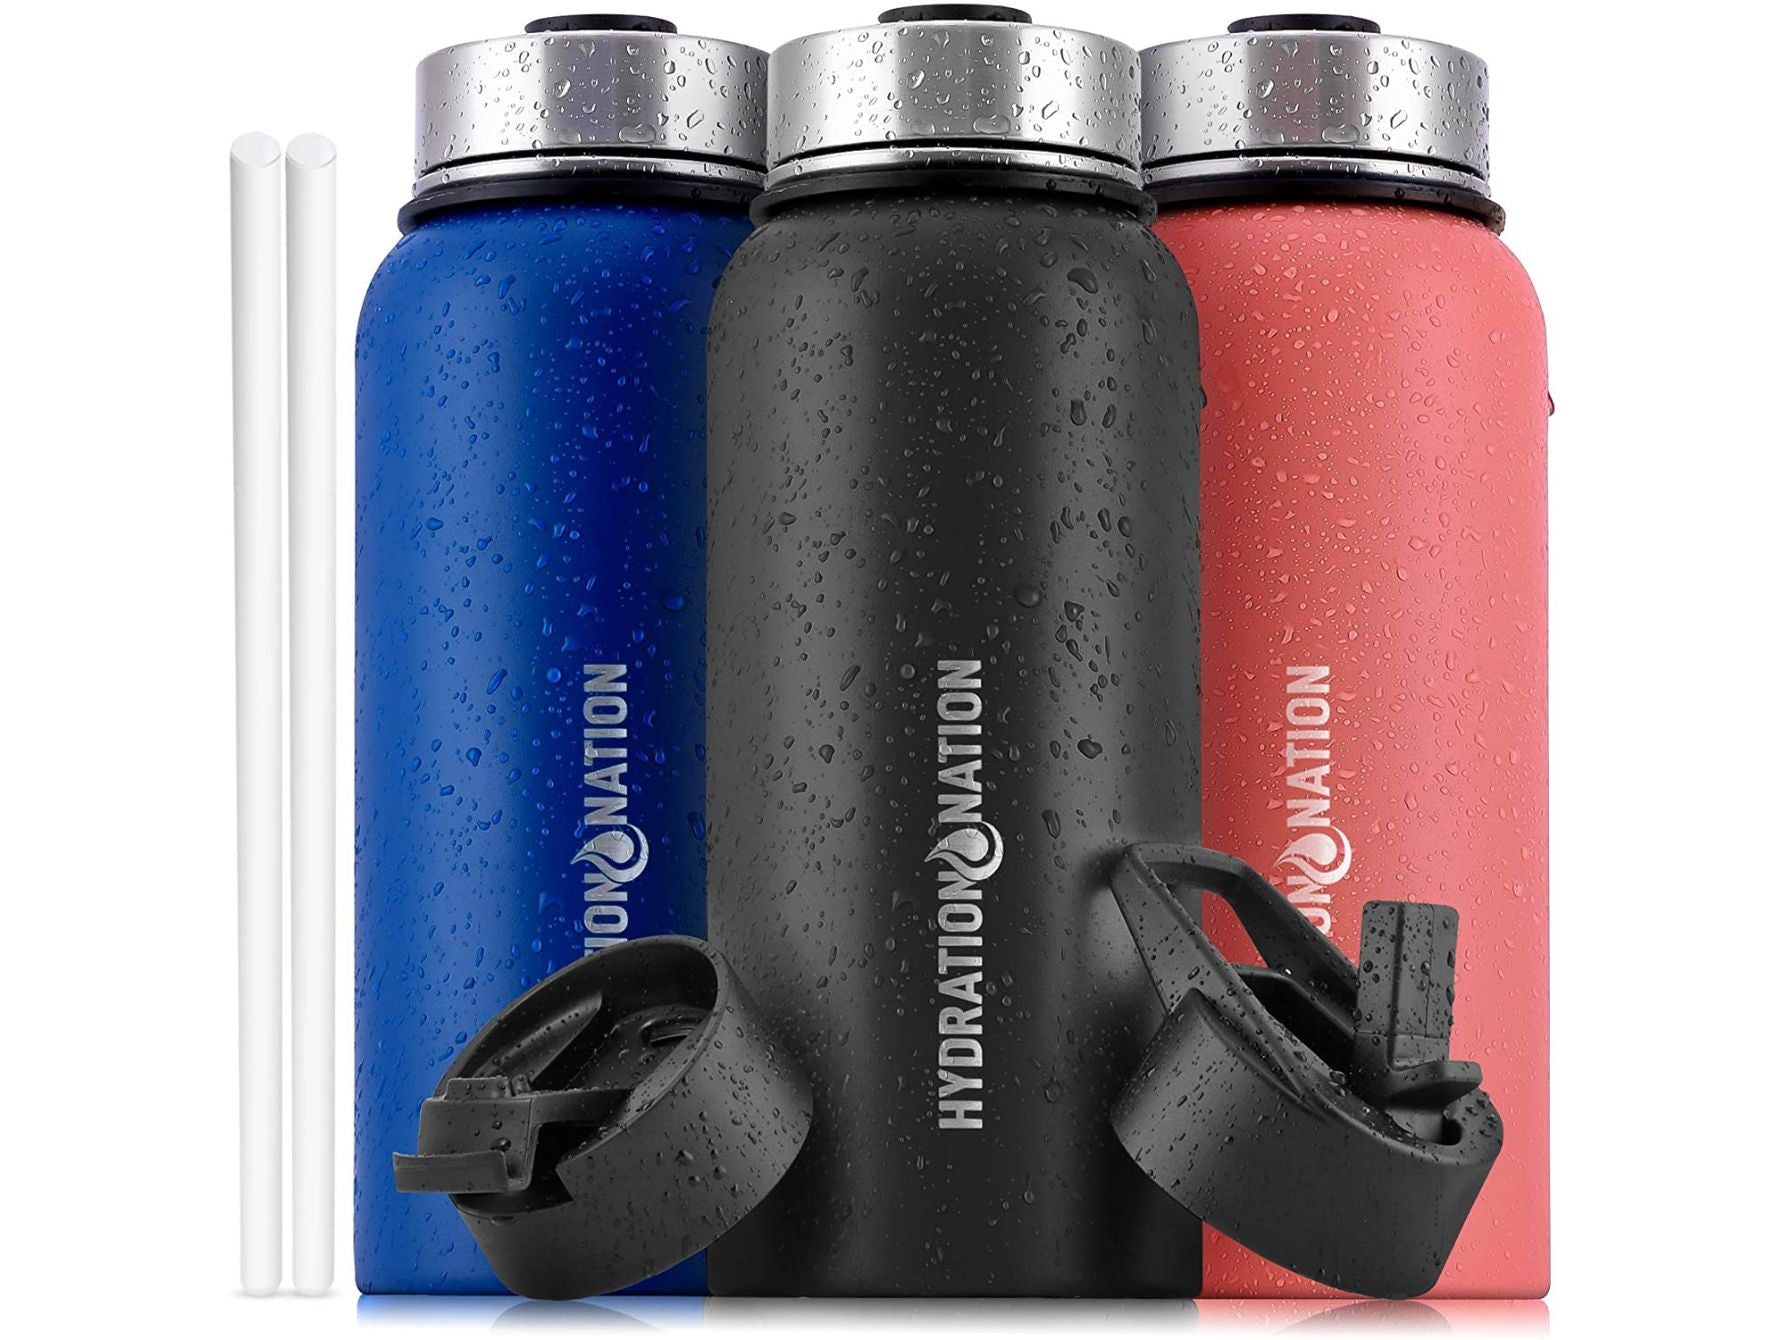 Zulay Plastic Flasks - 3 Pack